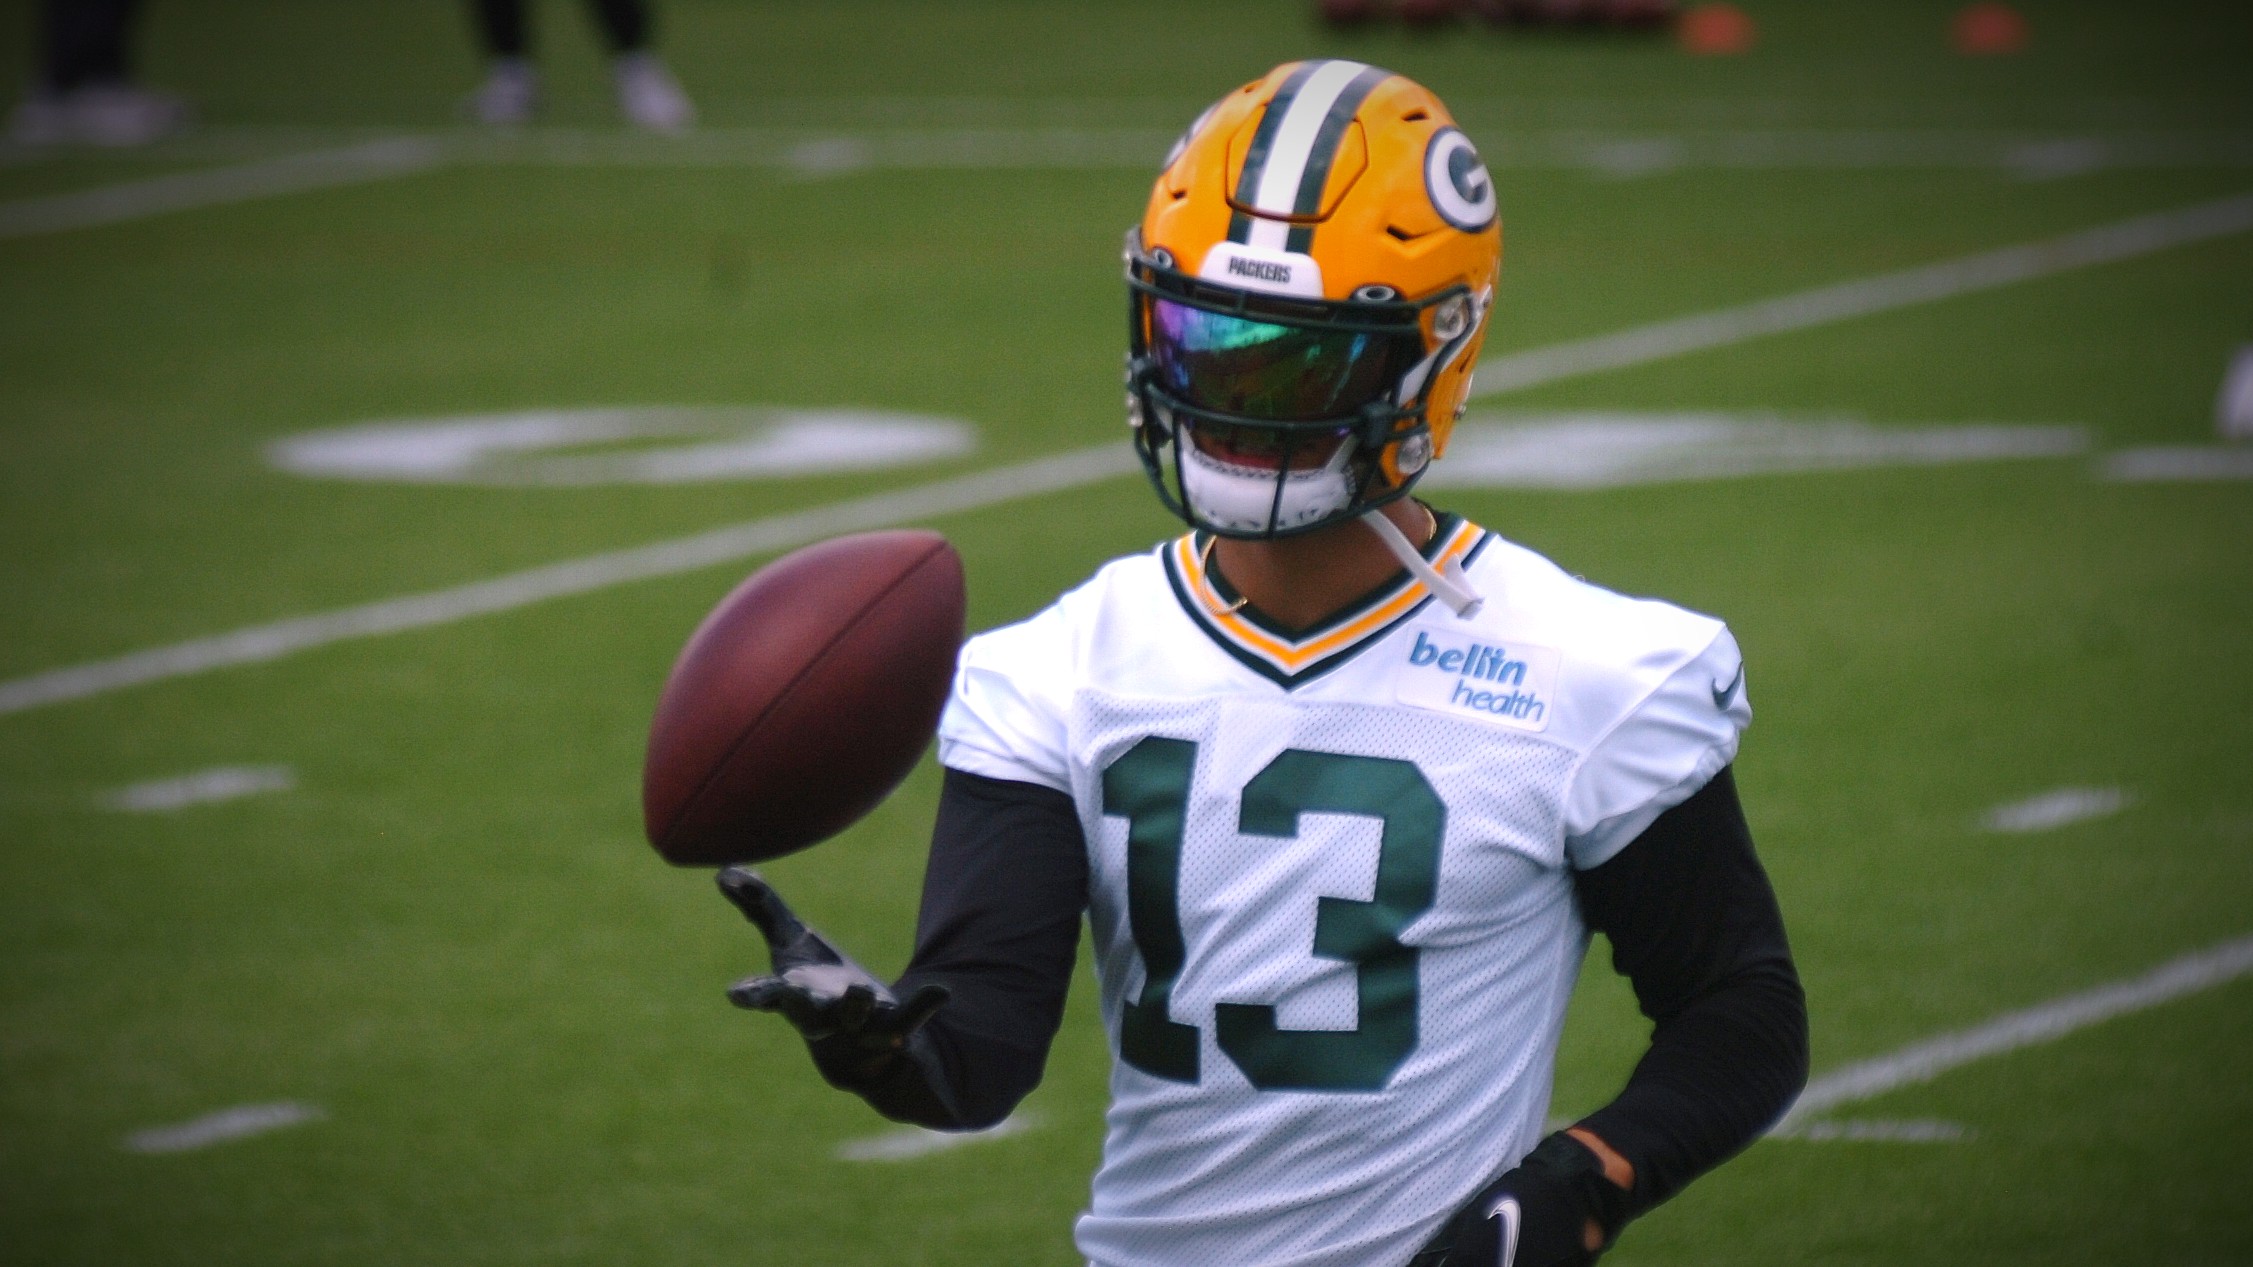 Packers wide receiver Alan Lazard during training camp in August 2021. Dan Plutchak/photo